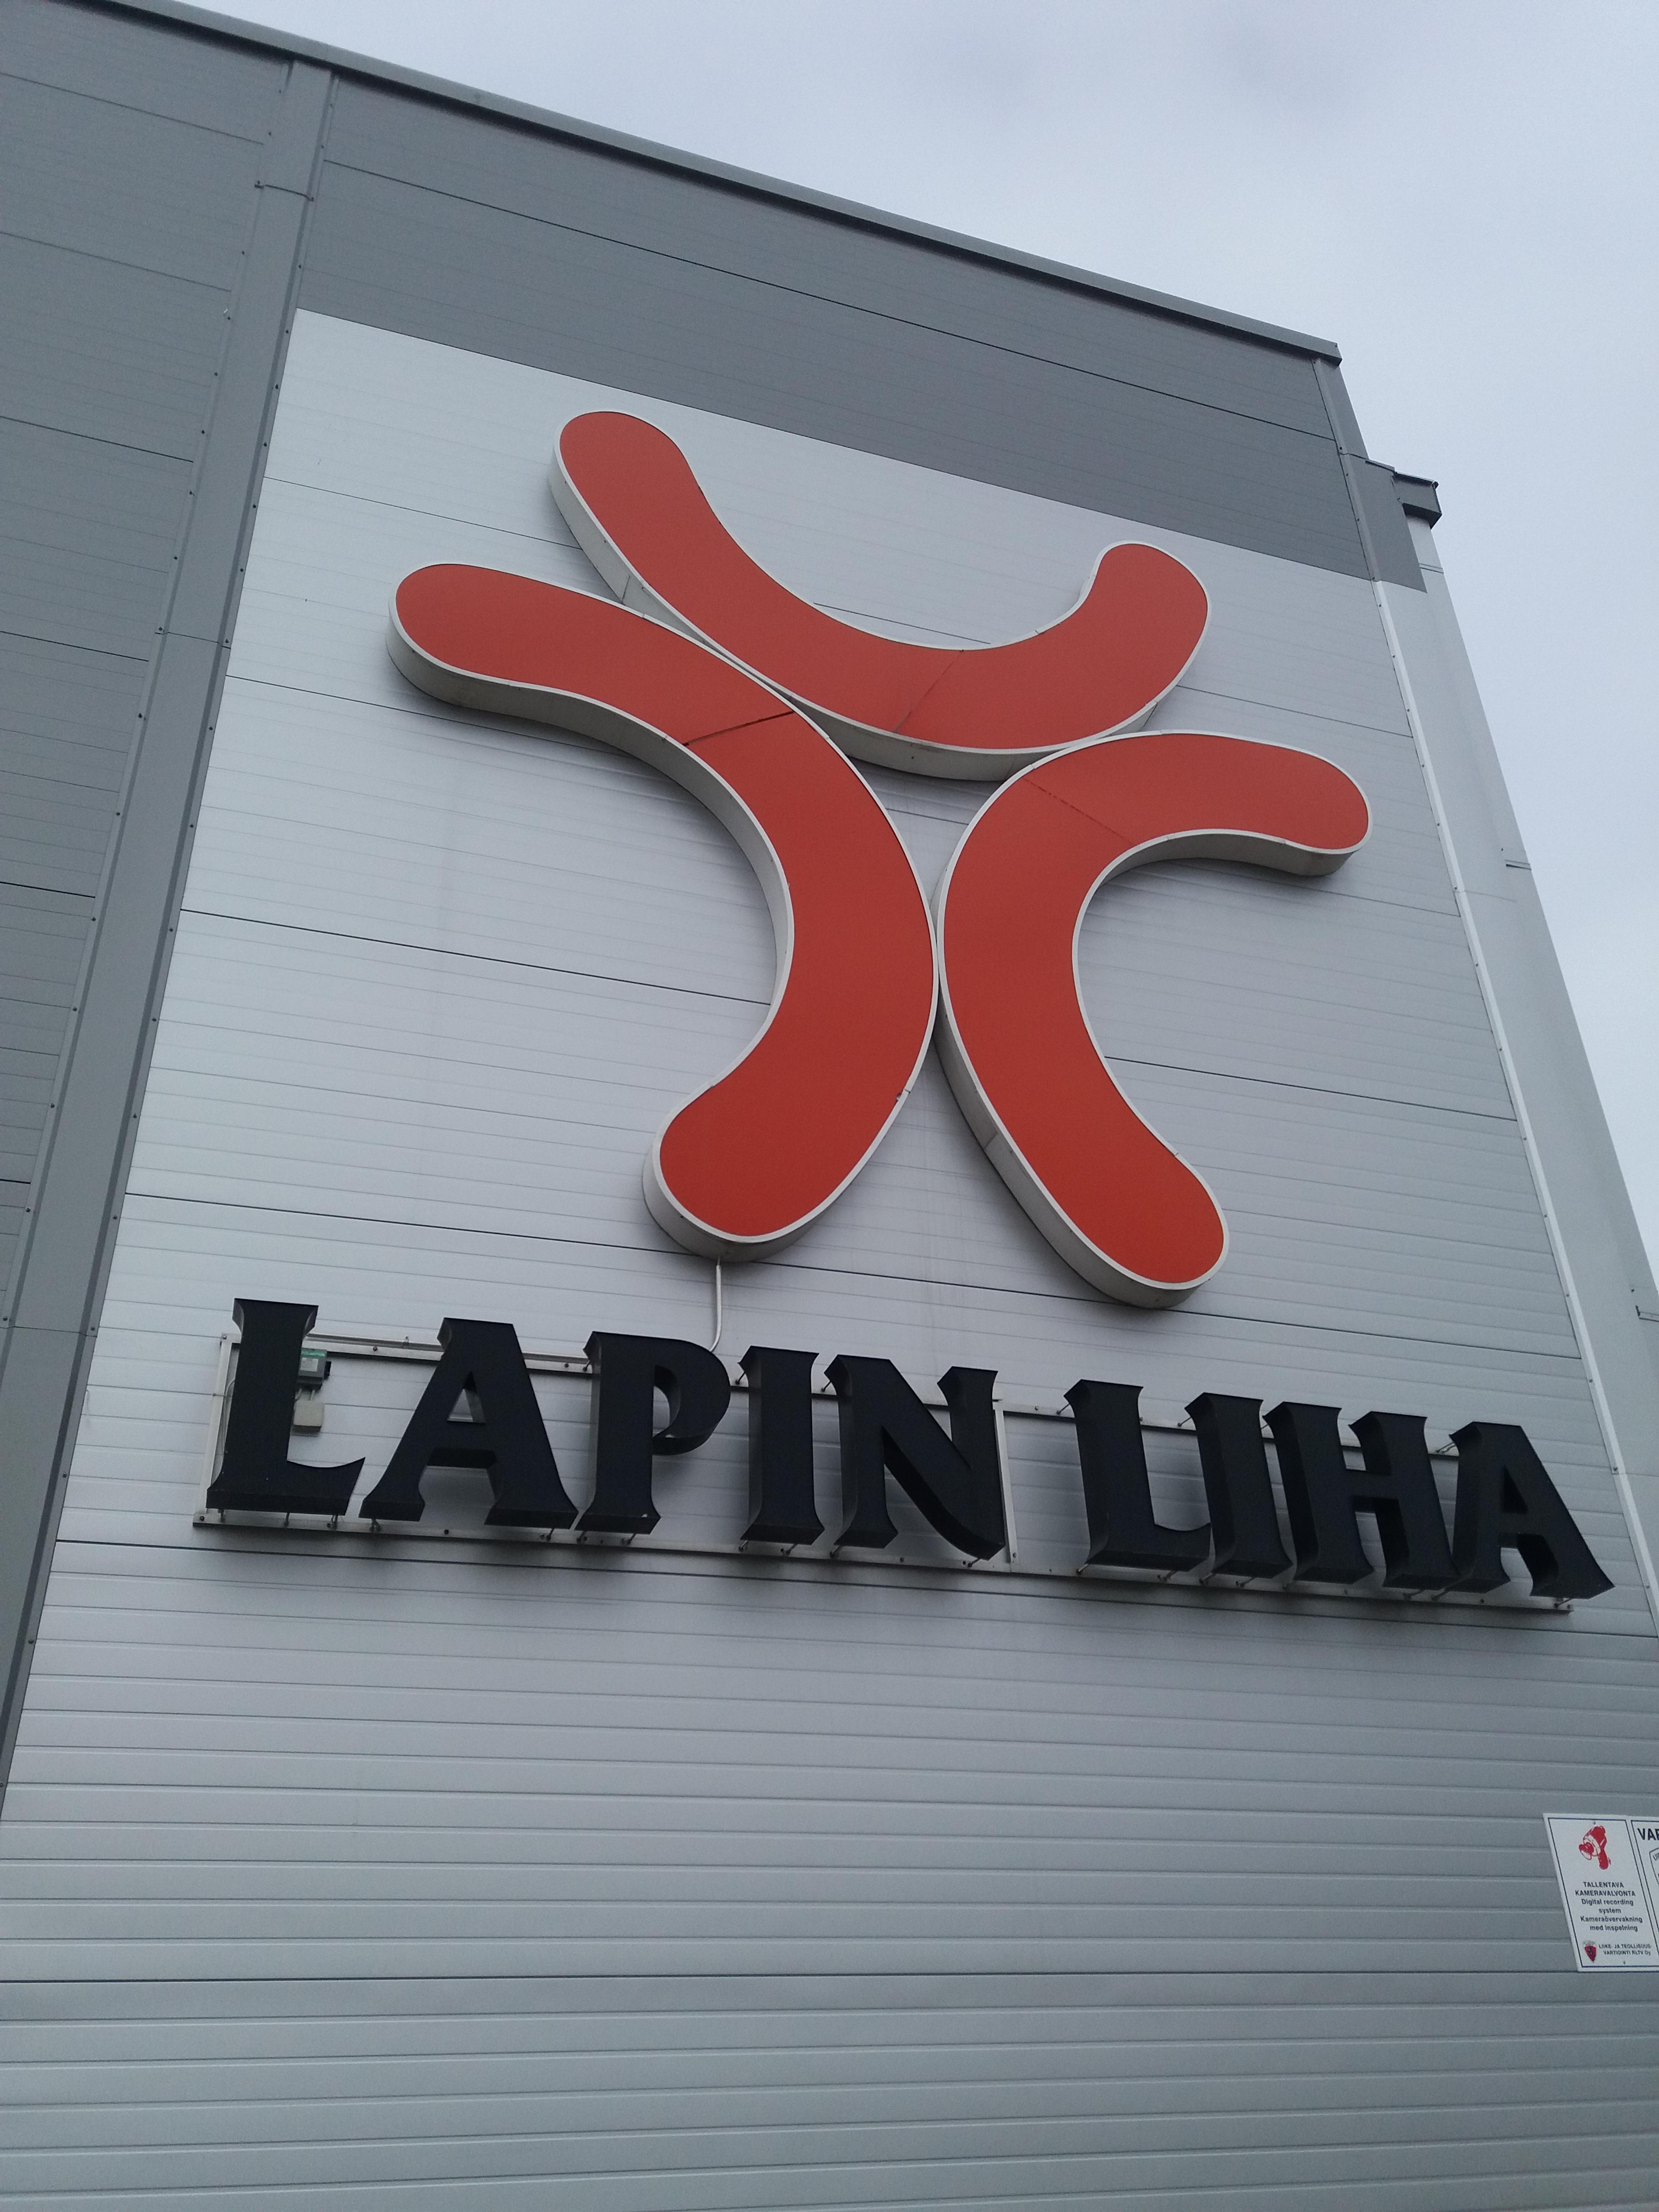 Cover image of this place Lapin Liha